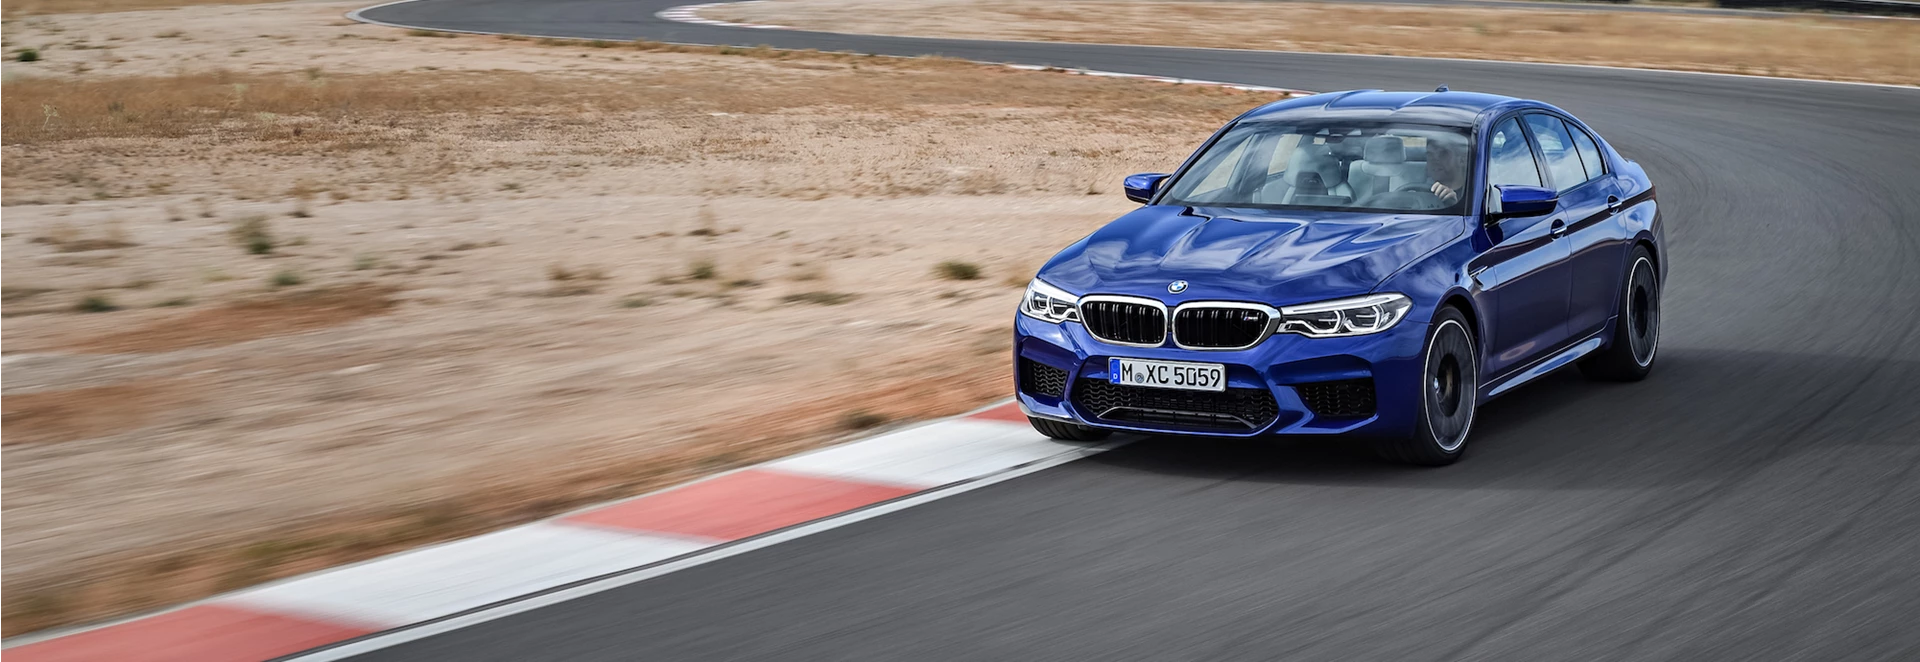 Guide to BMW M cars - which one should you buy?